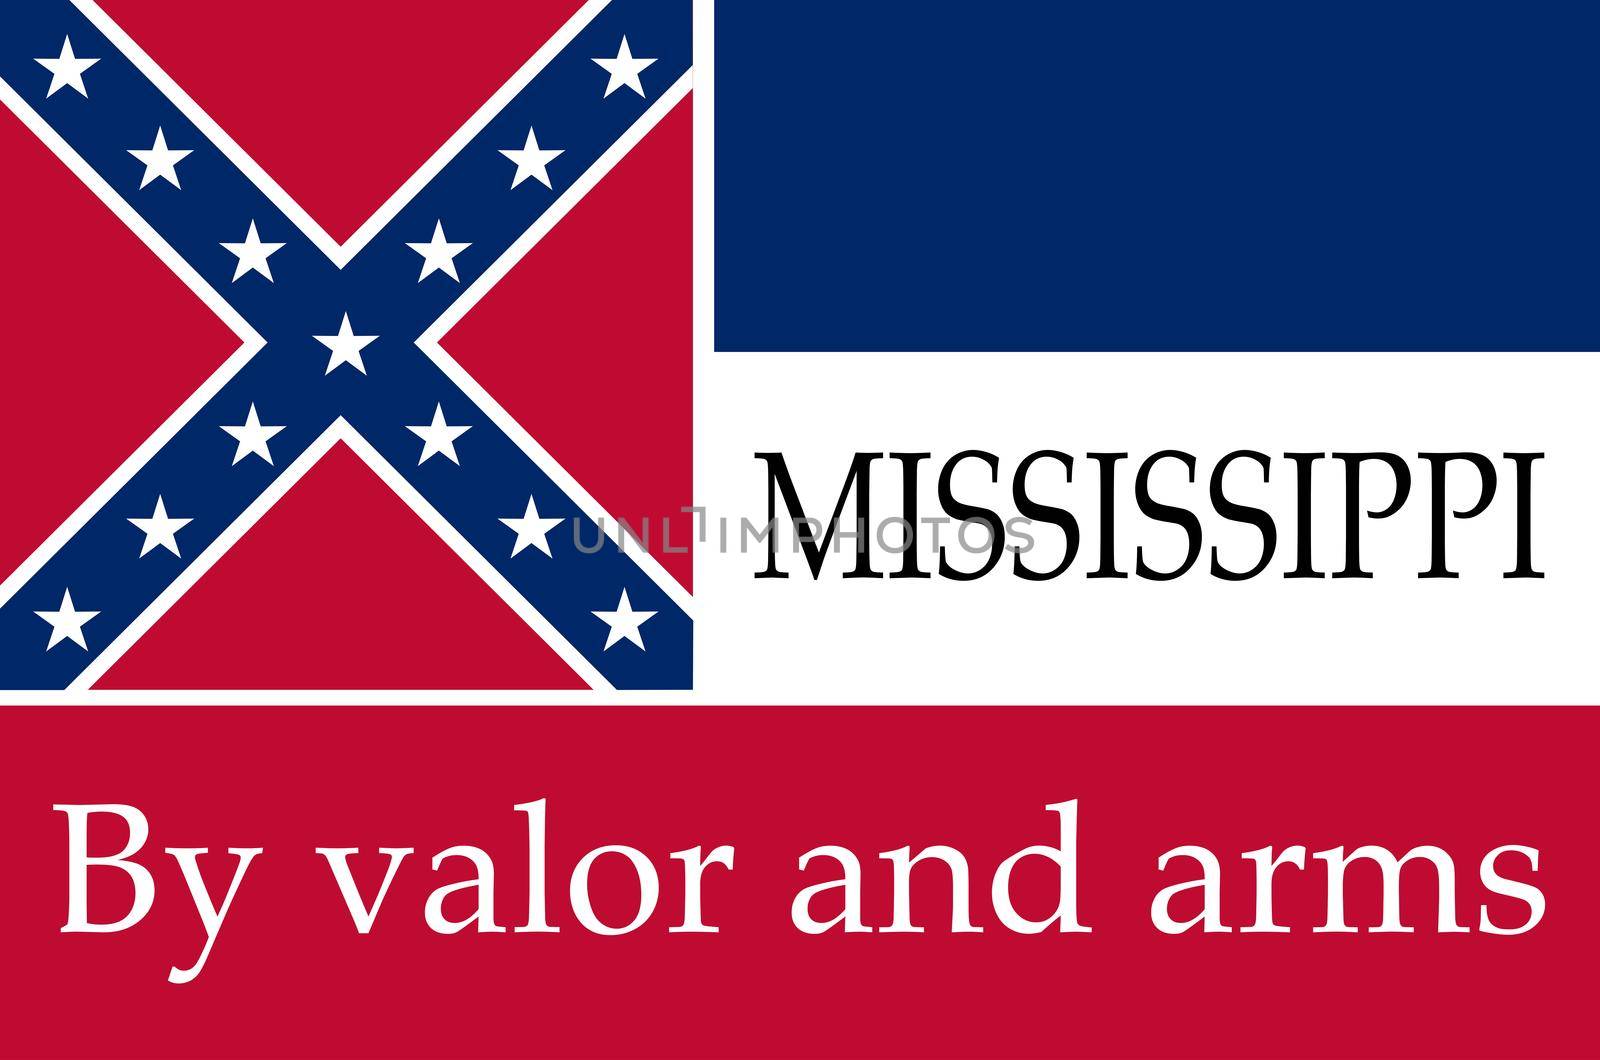 The flag of the USA state of Mississippi with the state motto by valor and arms